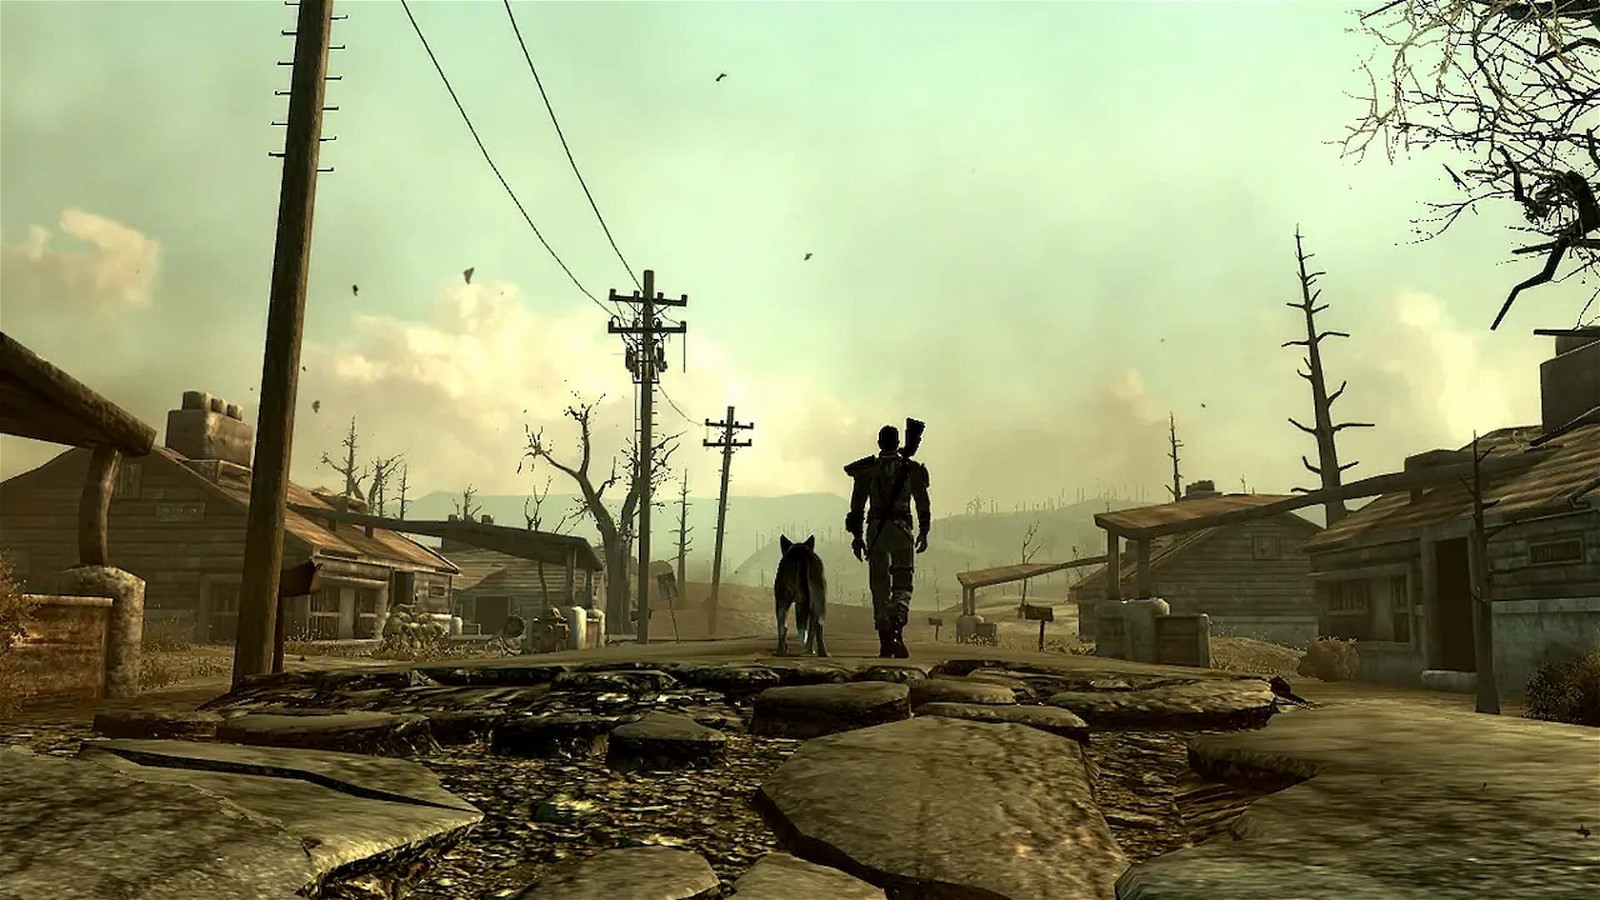 Fallout 3 fans have wanted a Remastered game for a long time